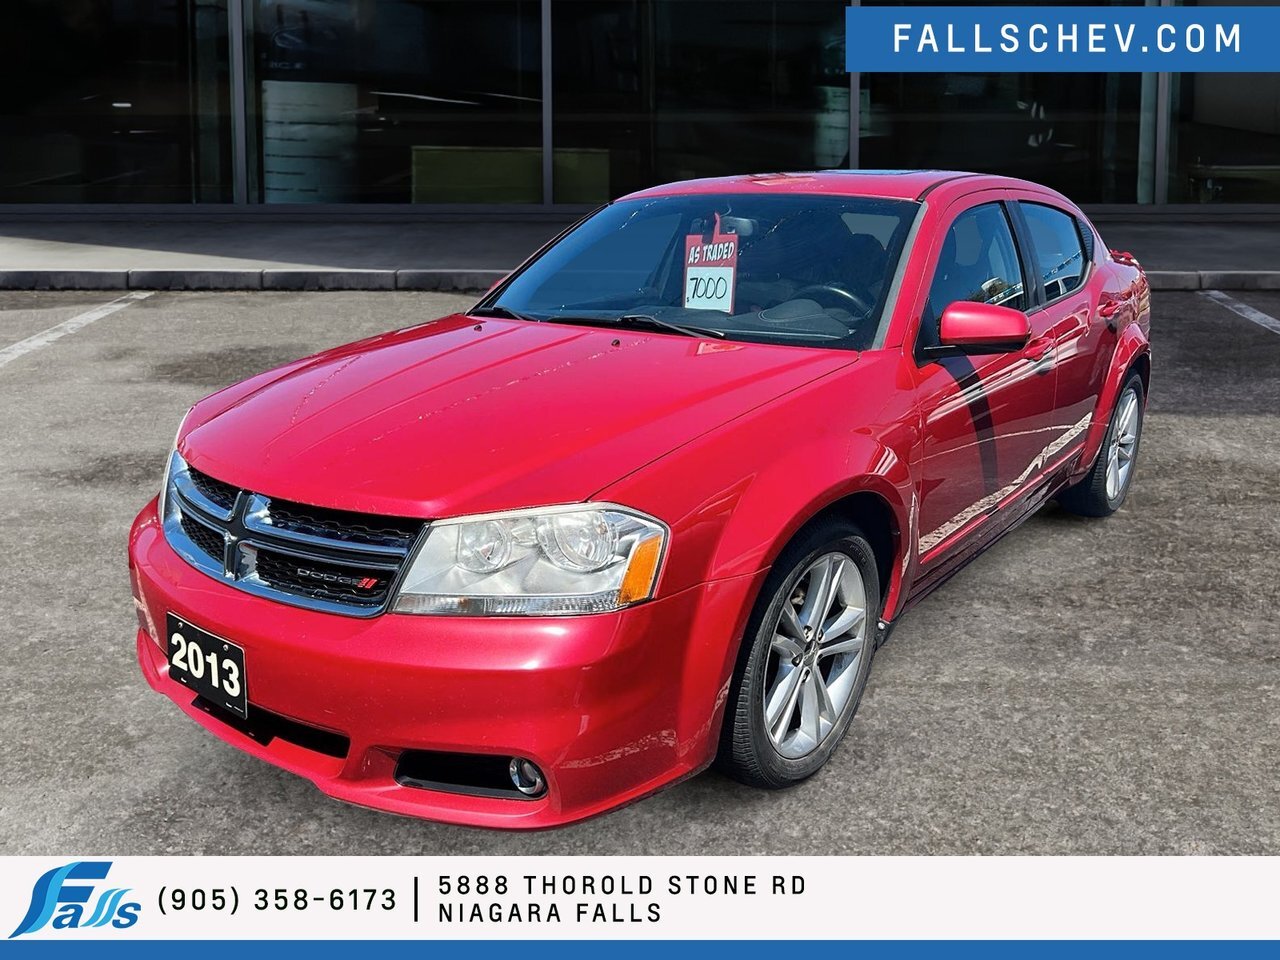 2013 Dodge Avenger SXT **VEHICLE BEING SOLD AS IS**